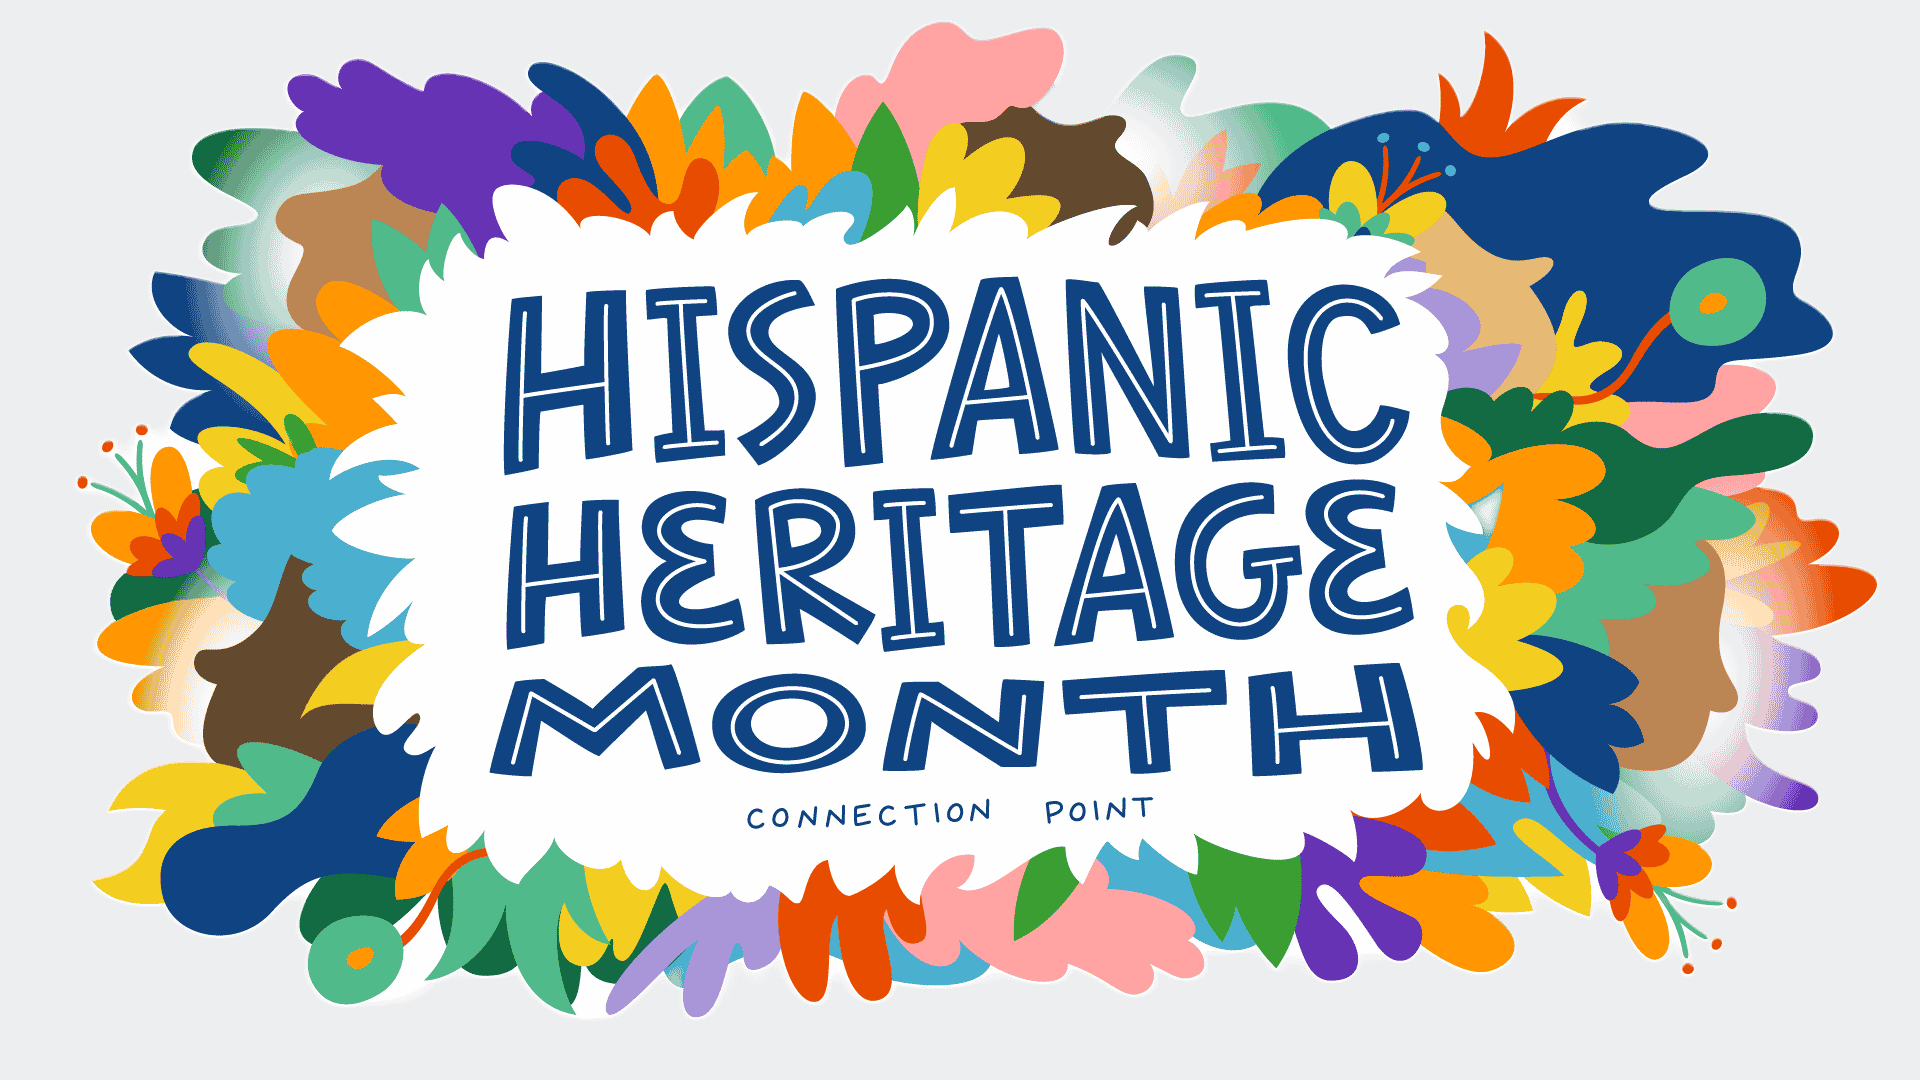 Food and Identity Go Hand in Hand: Hispanic Heritage Month - M Booth